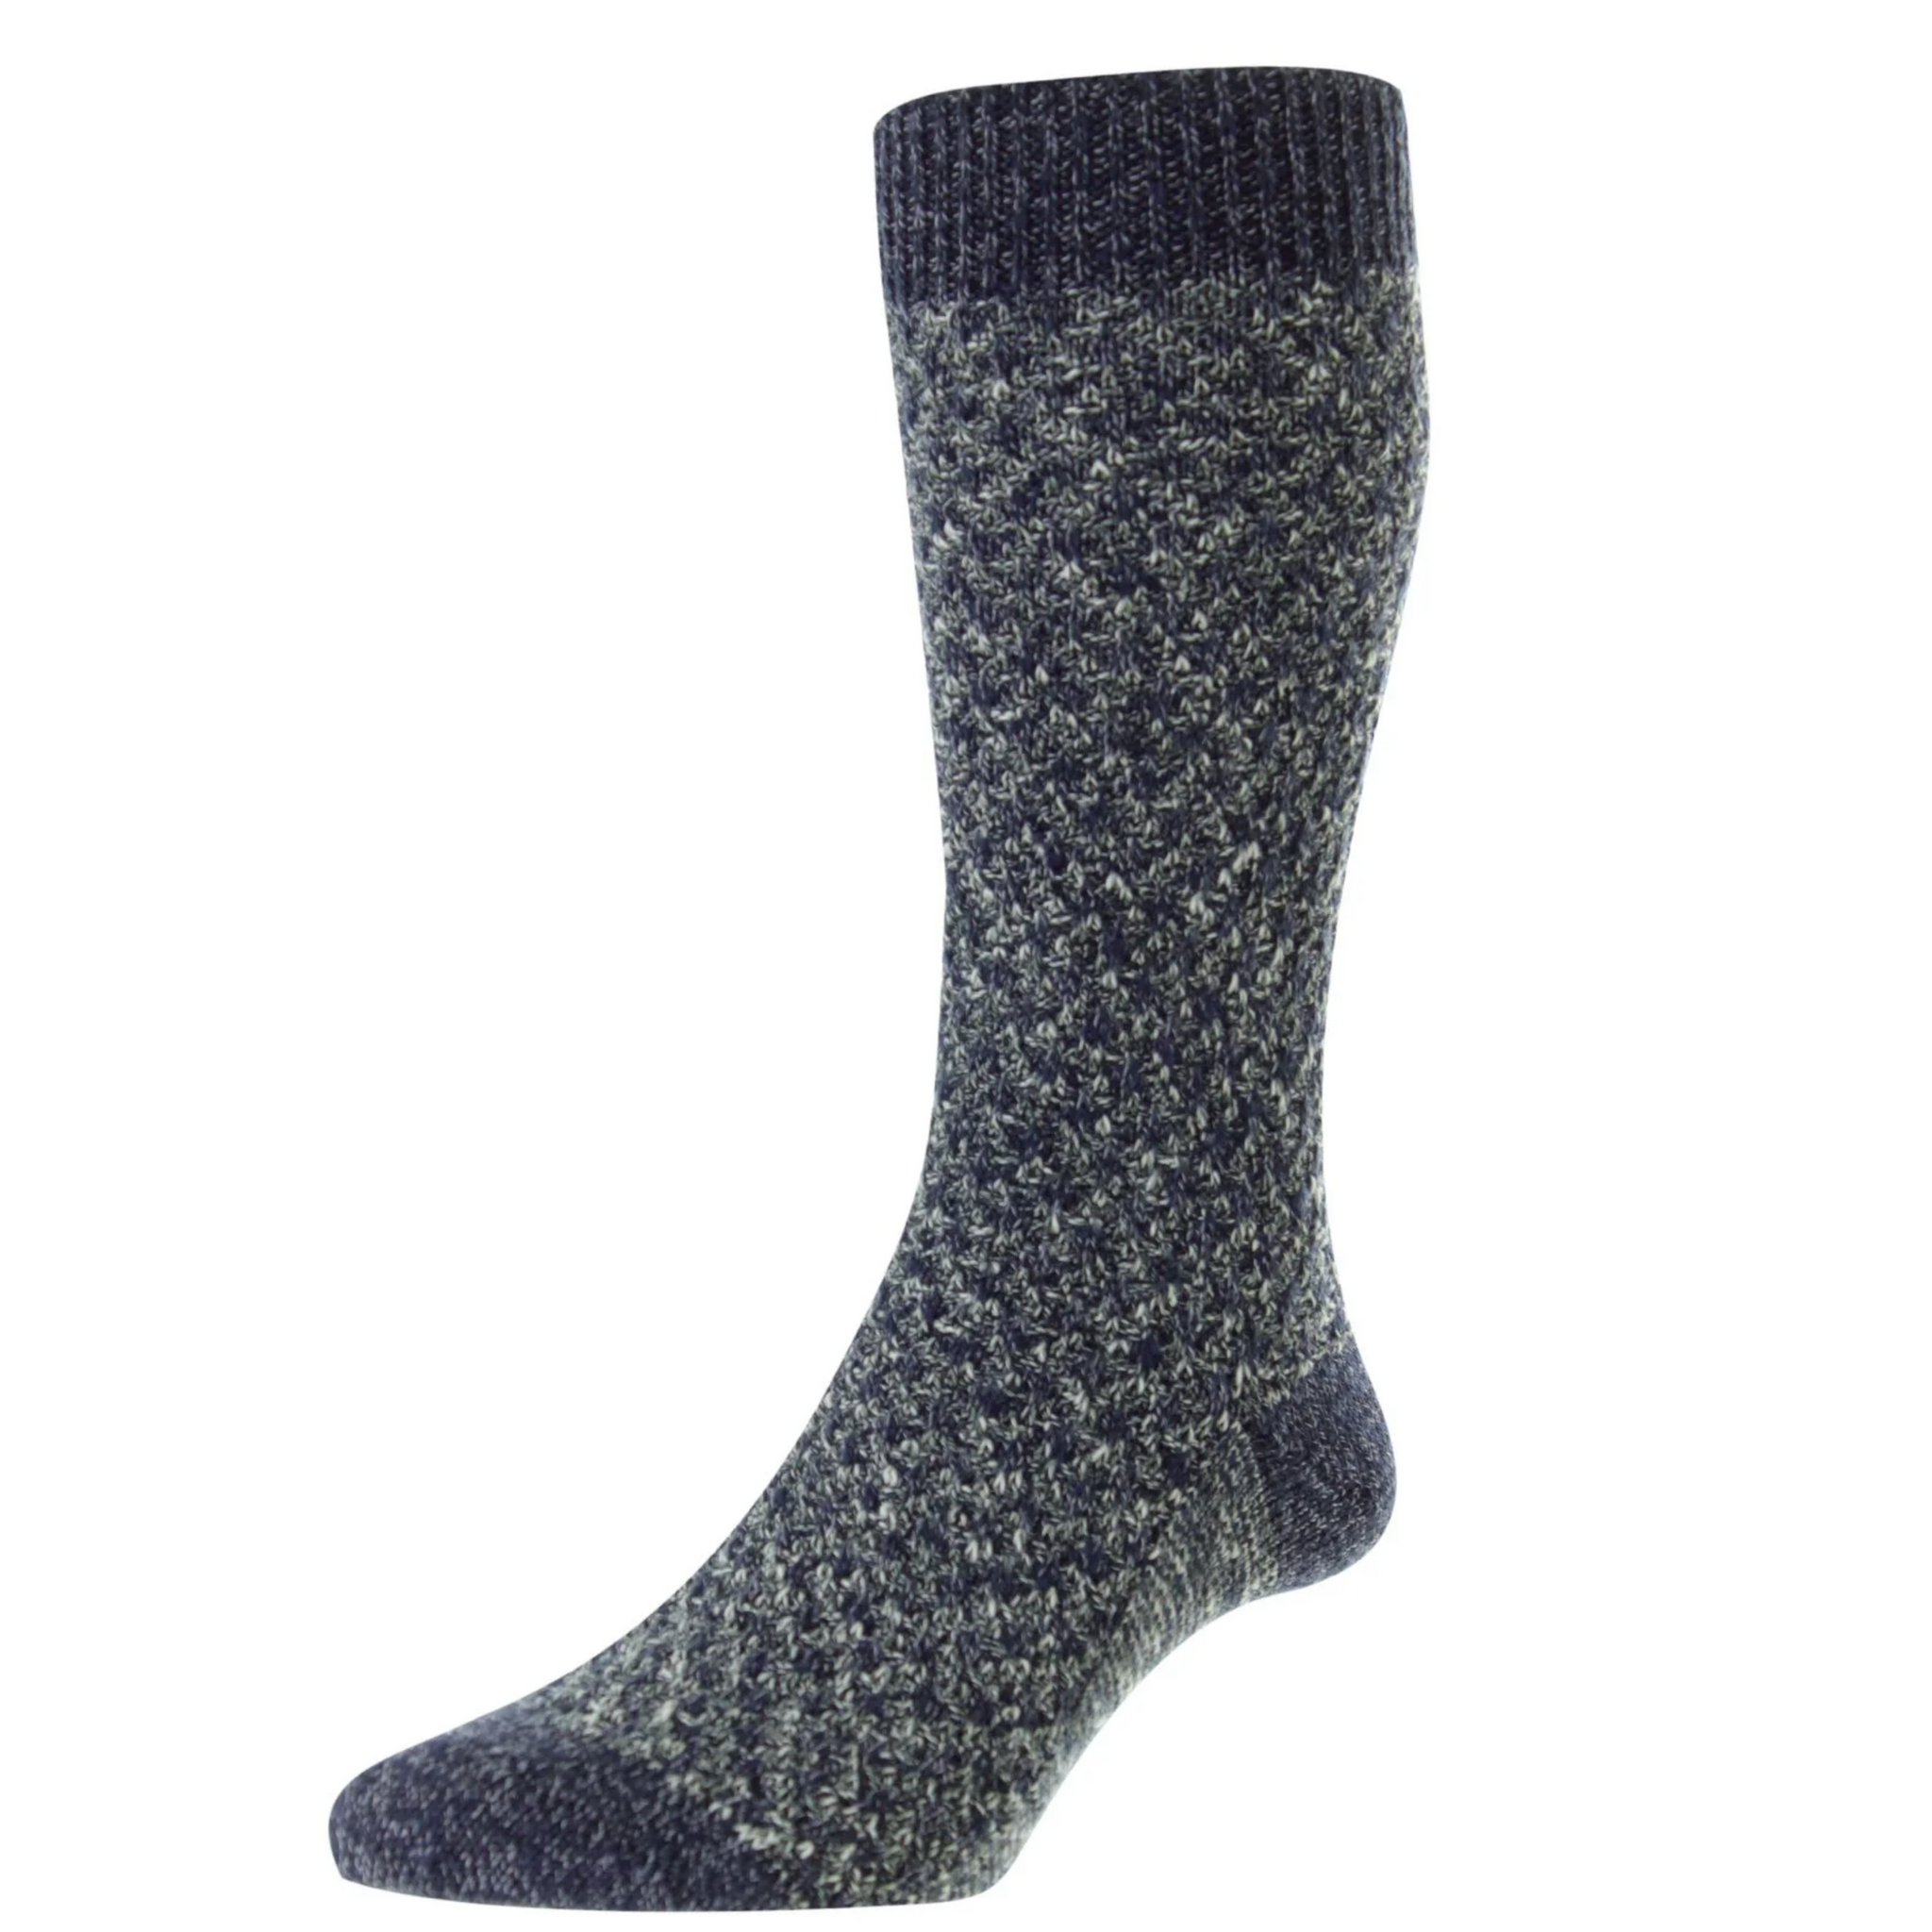 eco knit sock with blue and white colouring